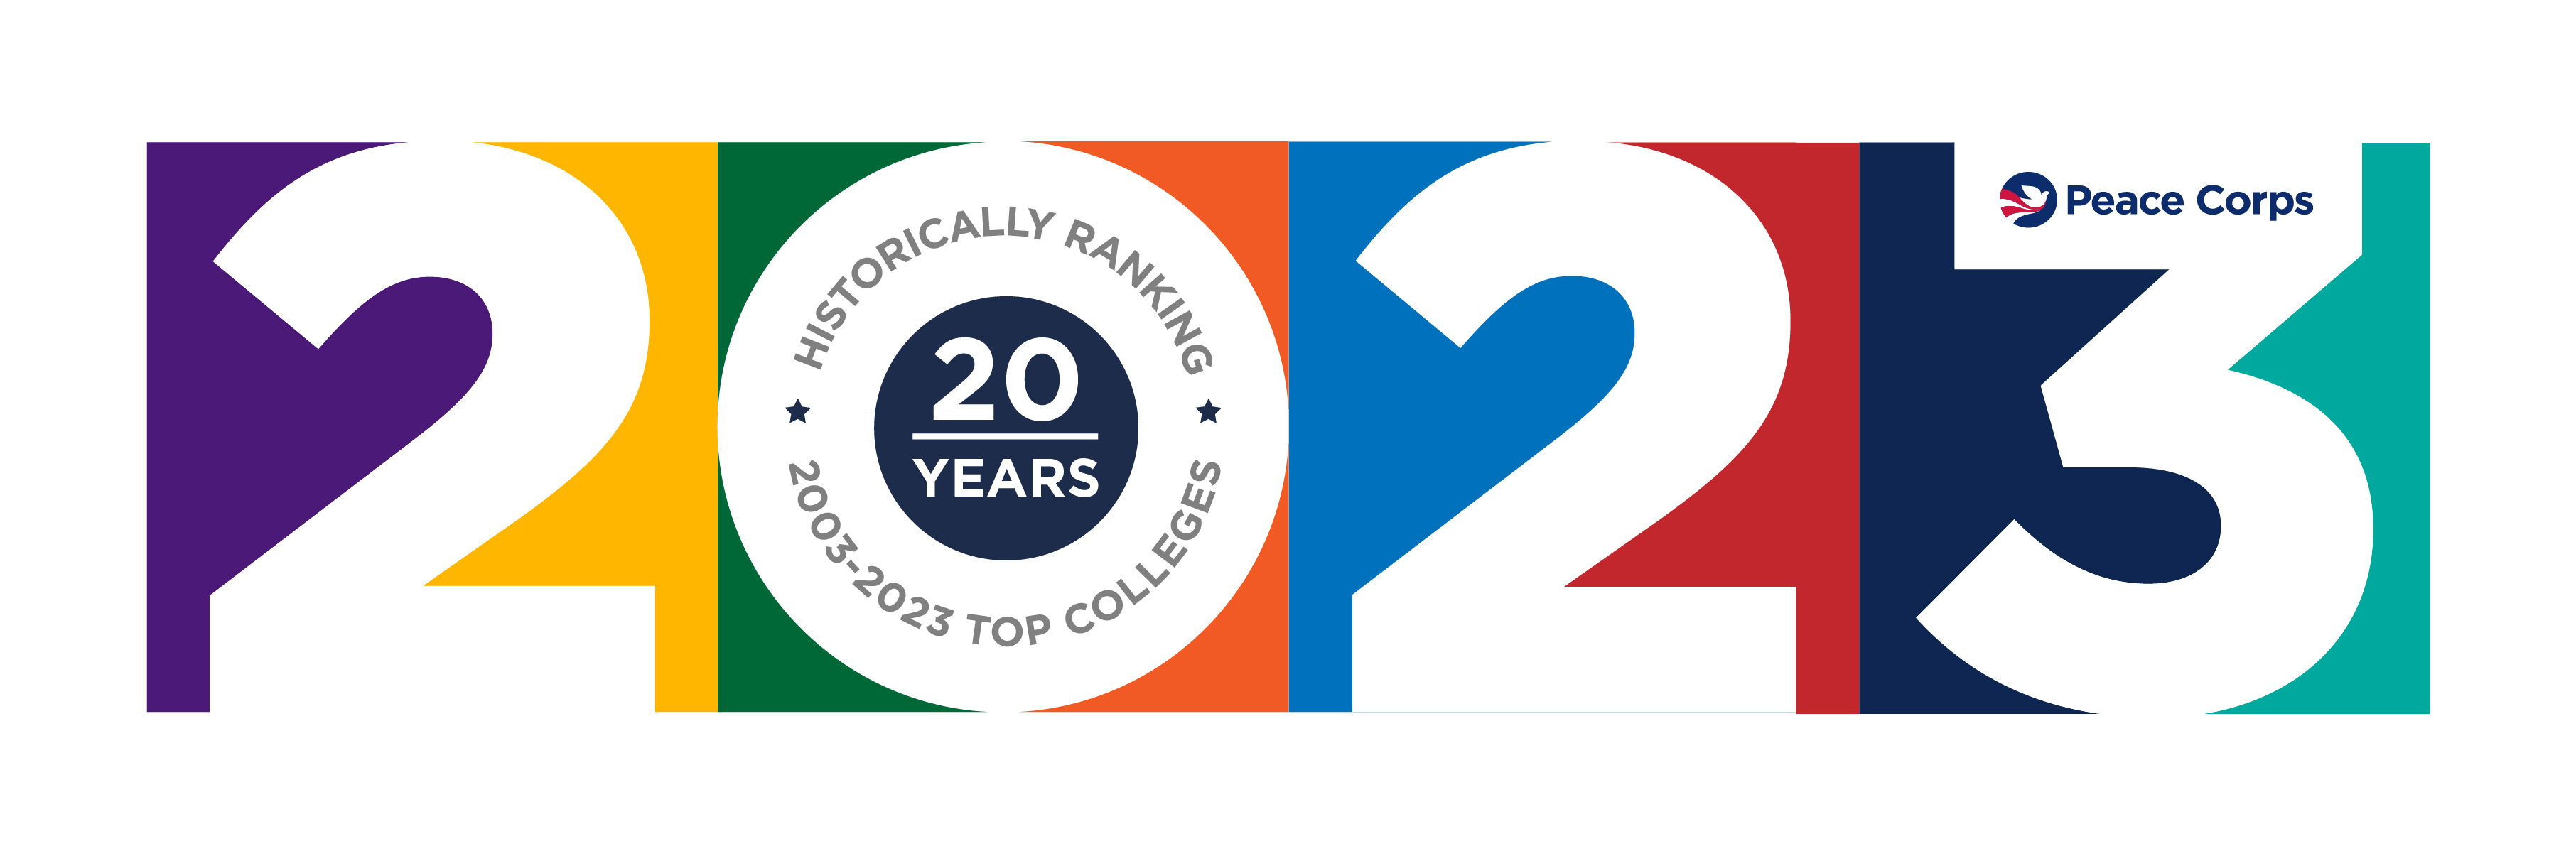 Promo banner for Peace Corps top 20 volunteer-producing schools from 2003 to 2023